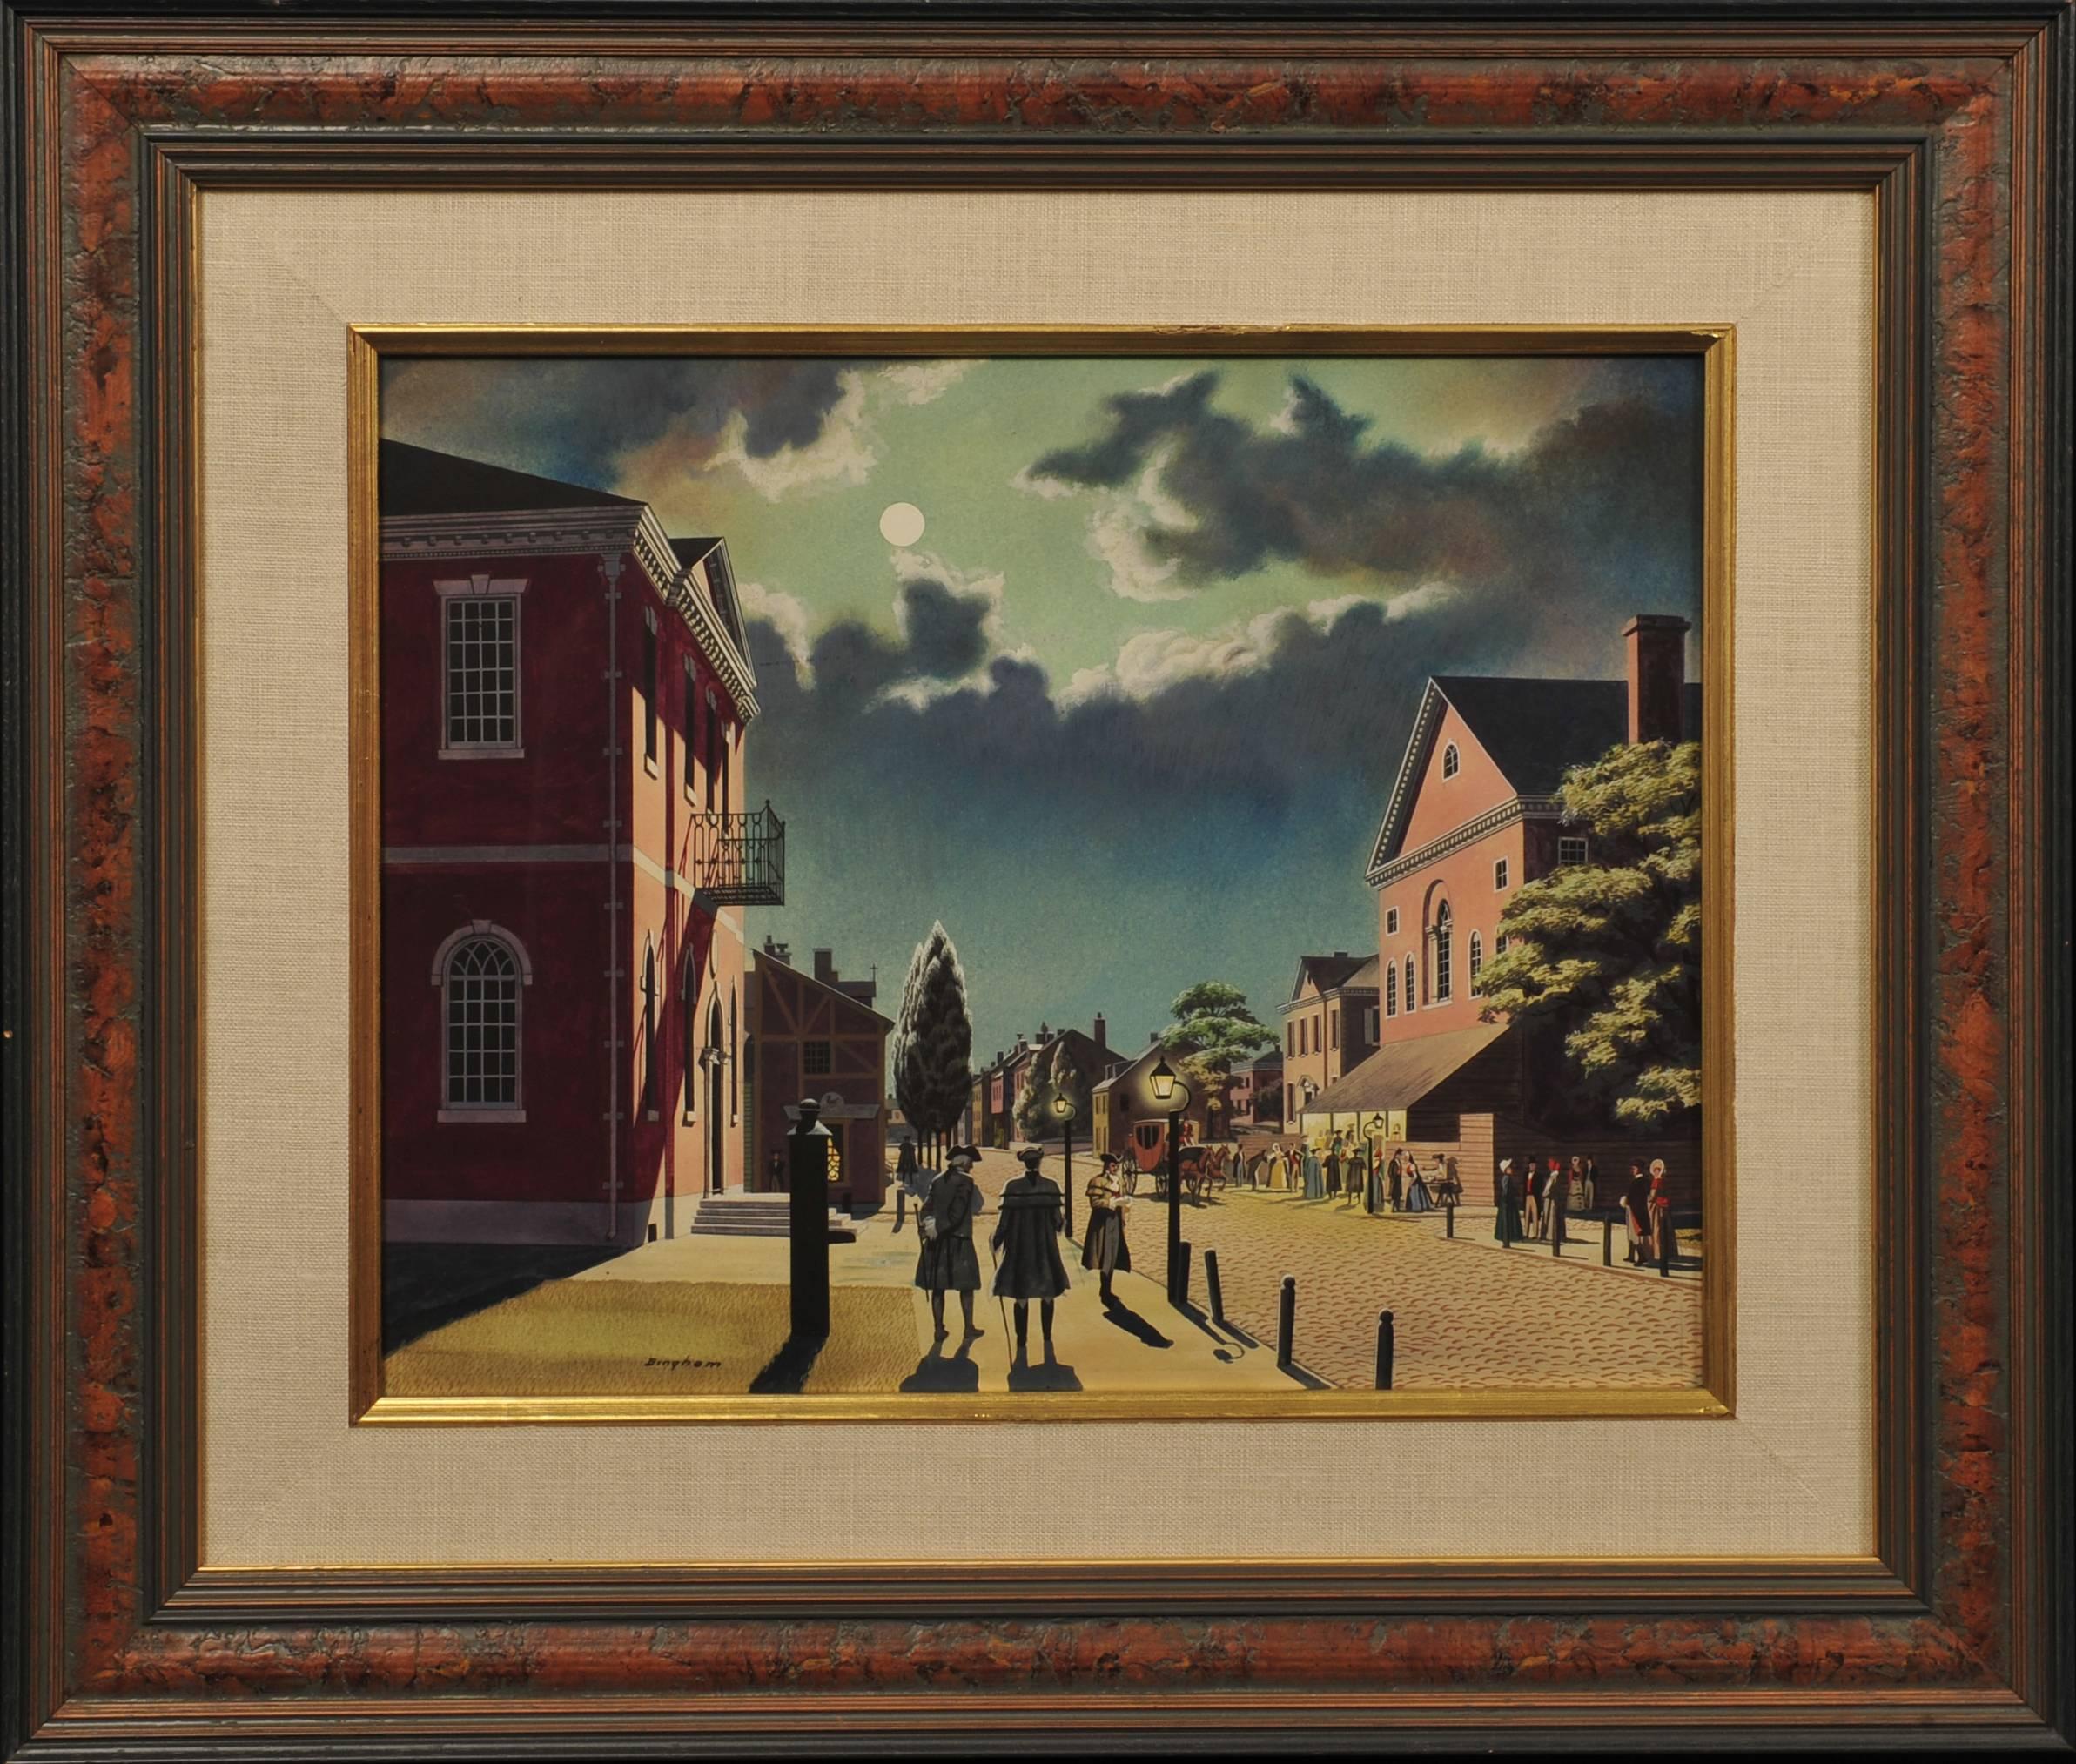 Chestnut Street's New Theatre - Other Art Style Painting by Unknown